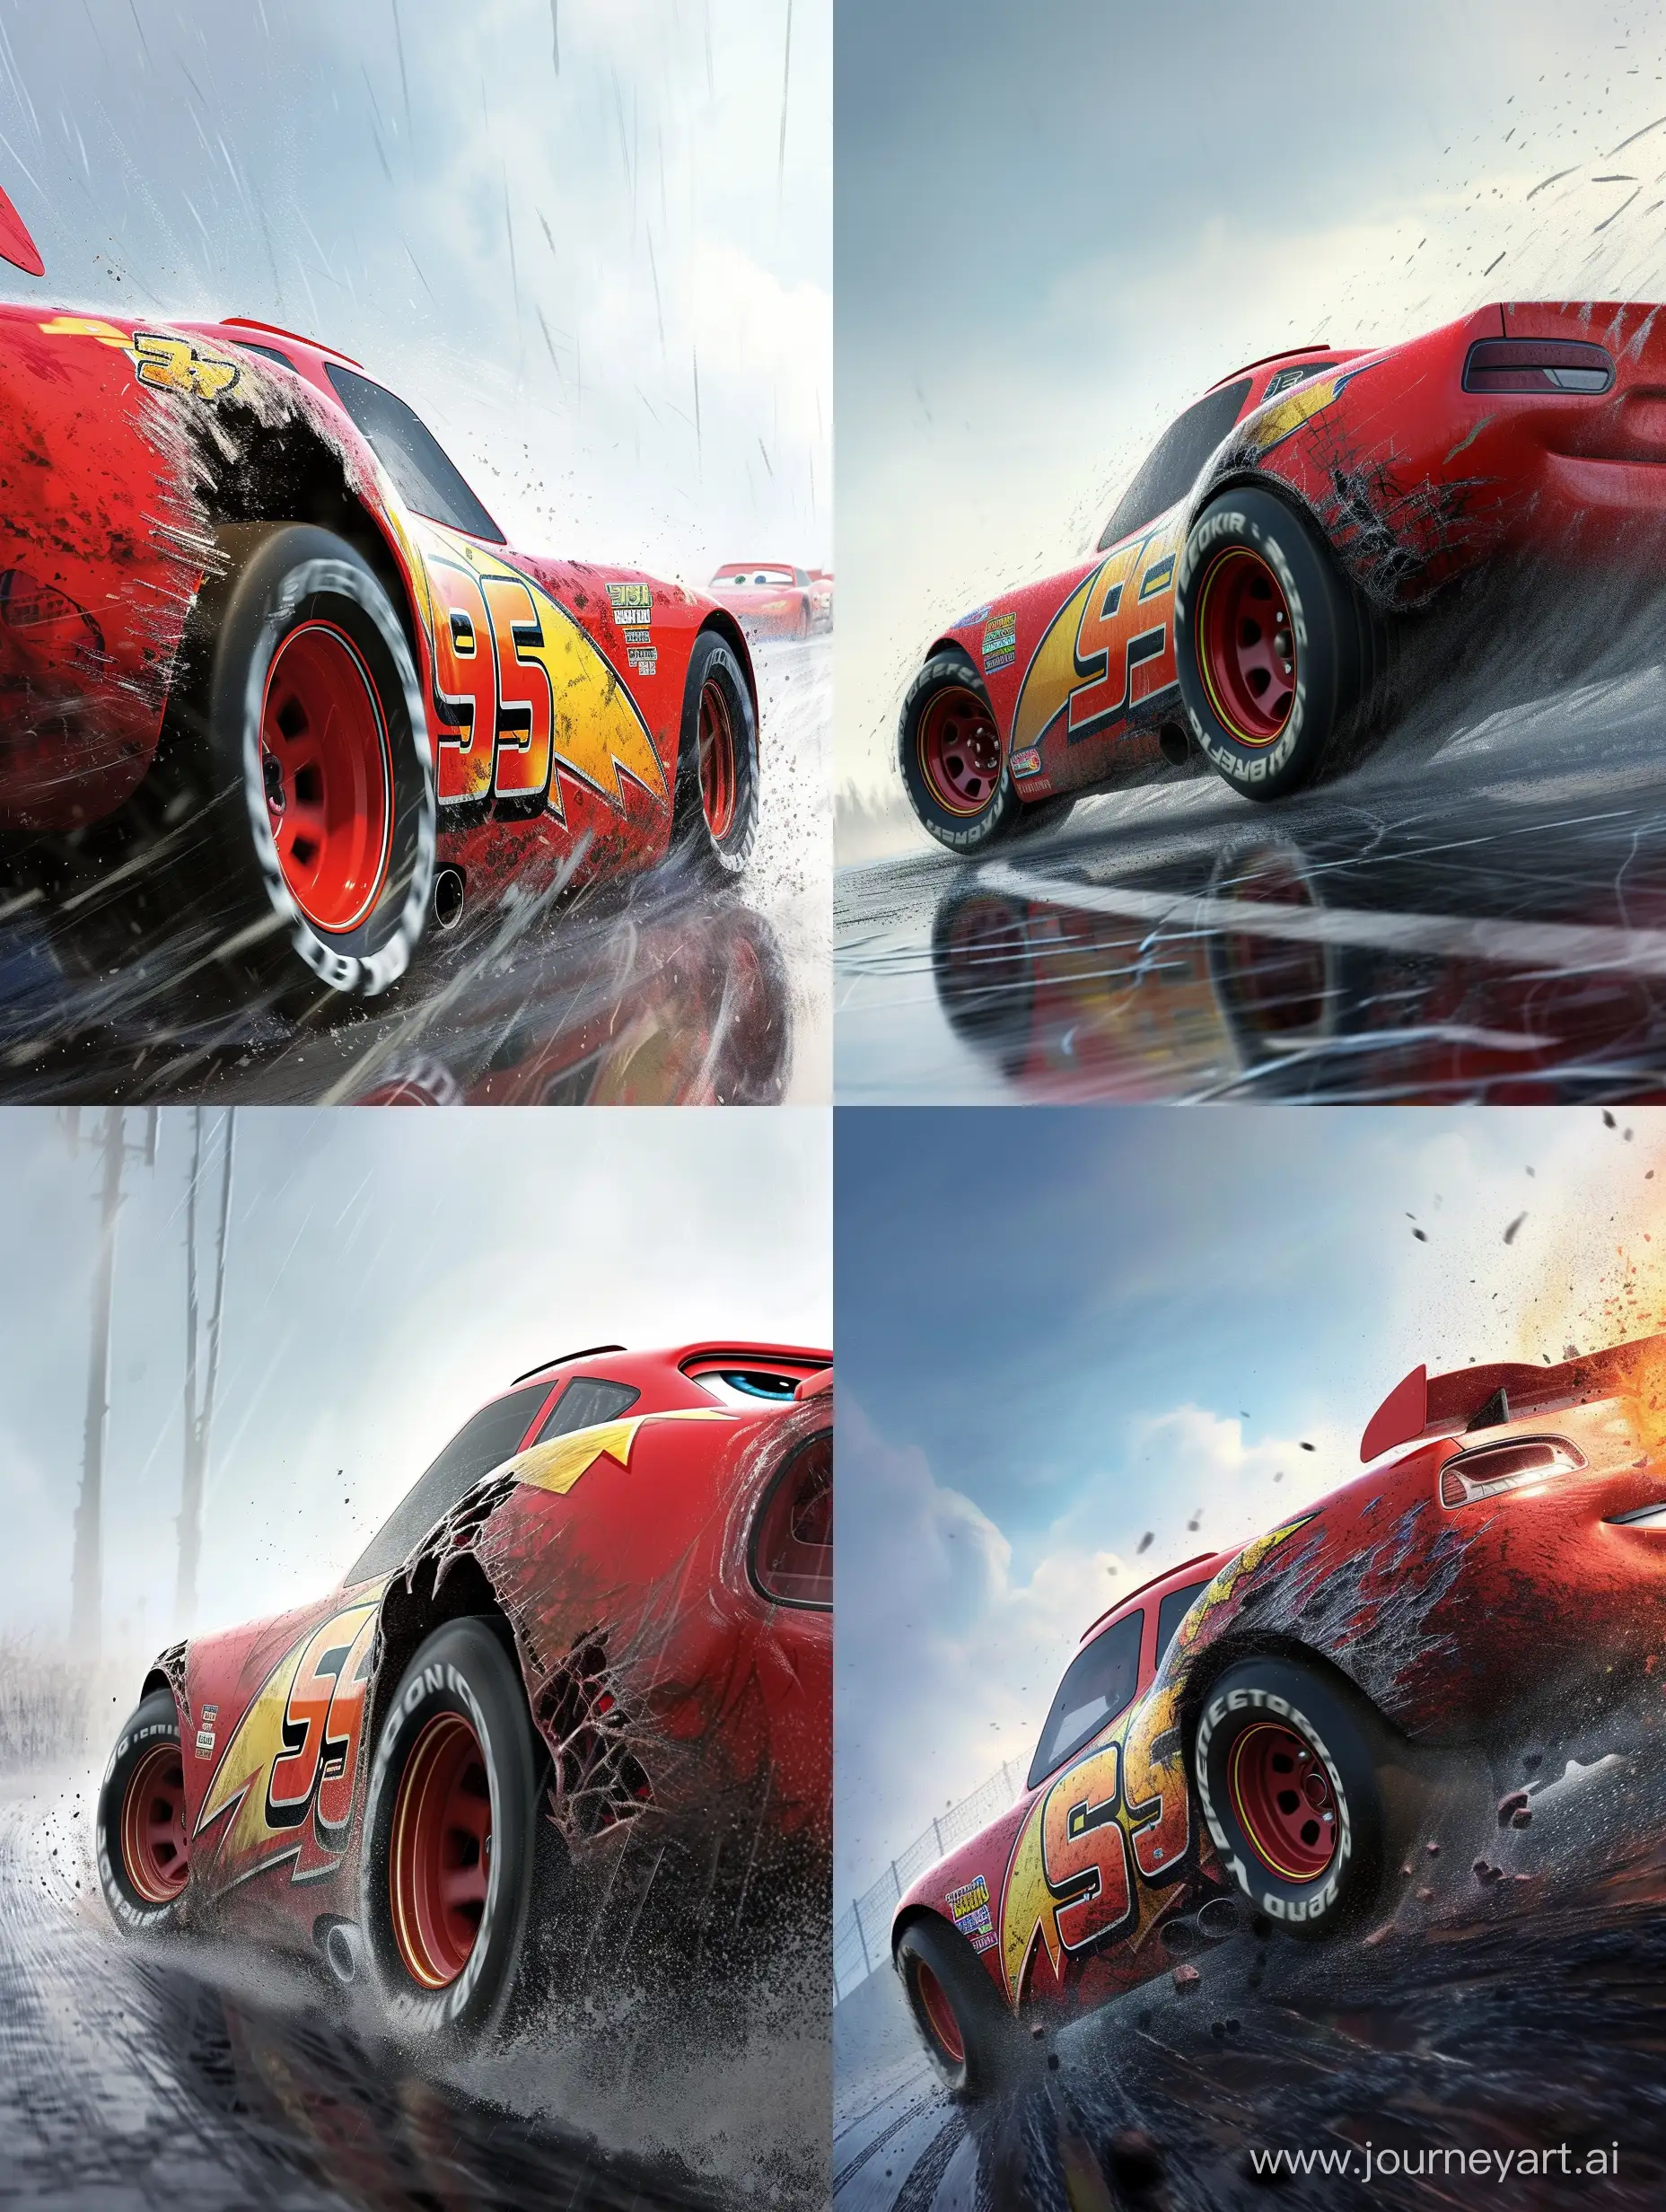 
Create a movie poster of cars 3 in which lightning McQueen is dead and his back part is totally damaged 
Style - Disney media franchise based art style